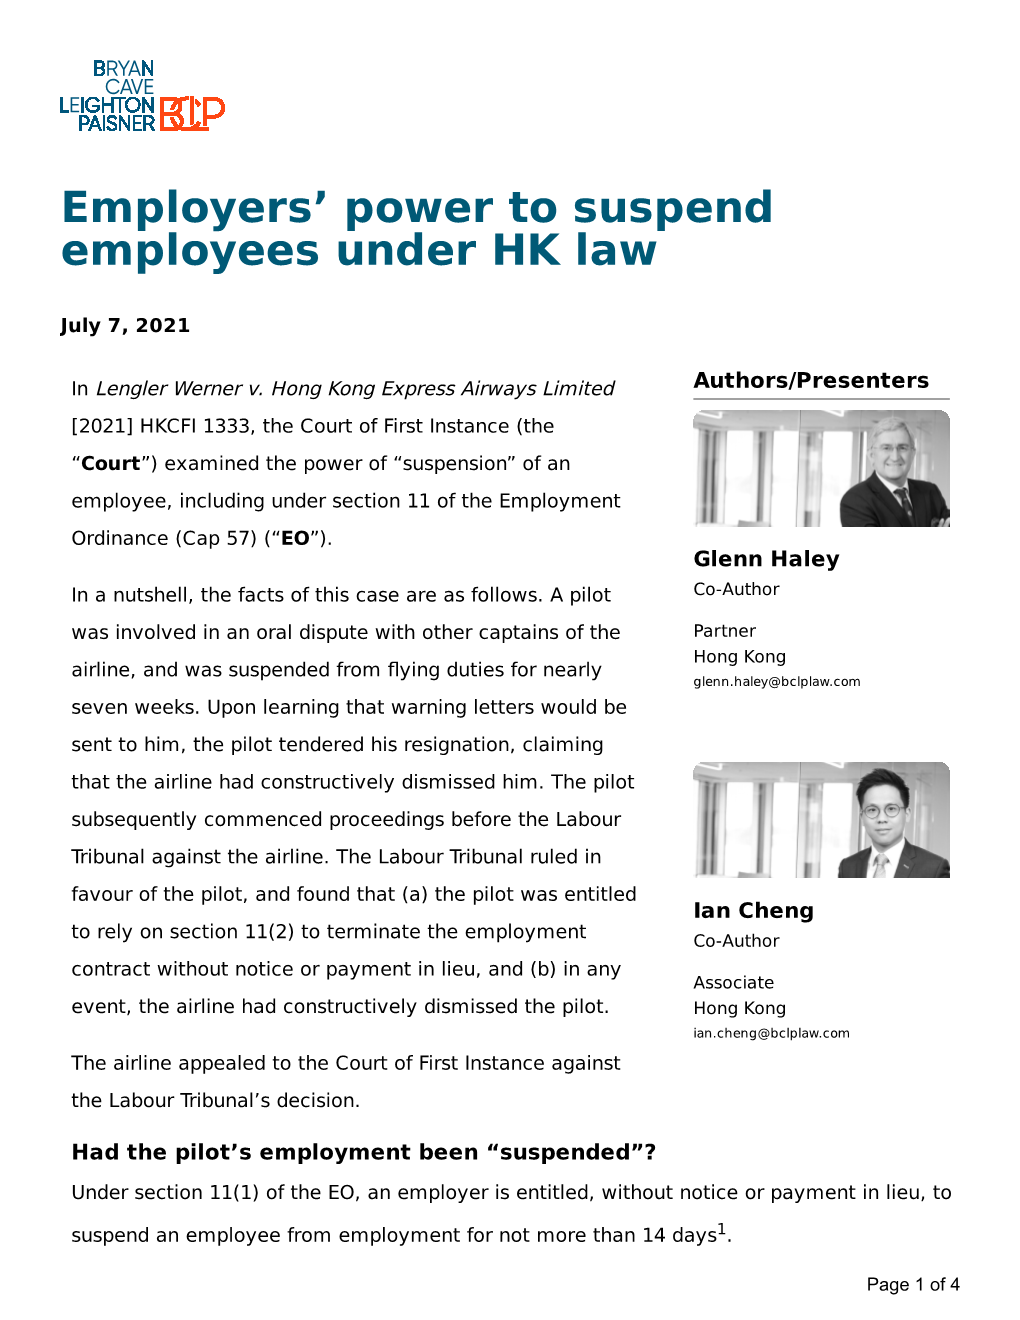 Employers' Power to Suspend Employees Under HK